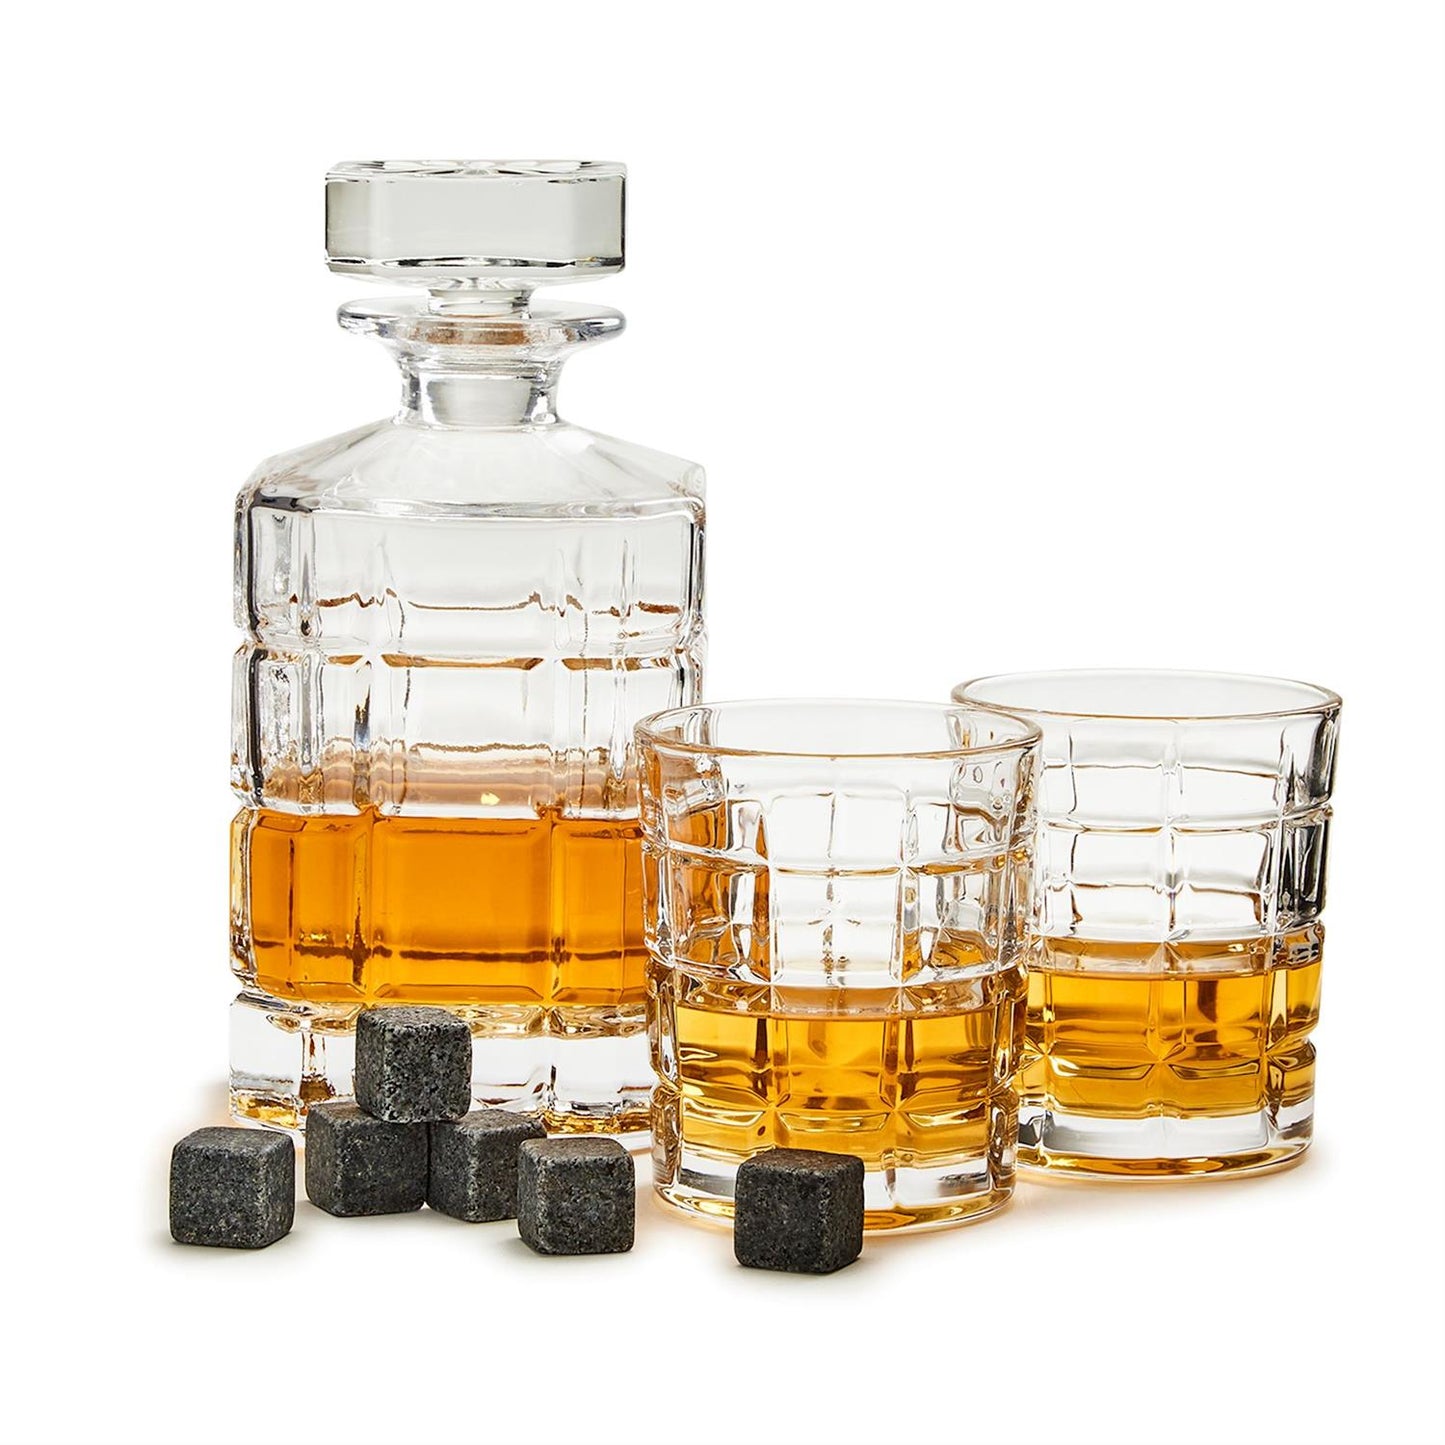 Two's Company "On The Rocks" Connoisseur Gift Set